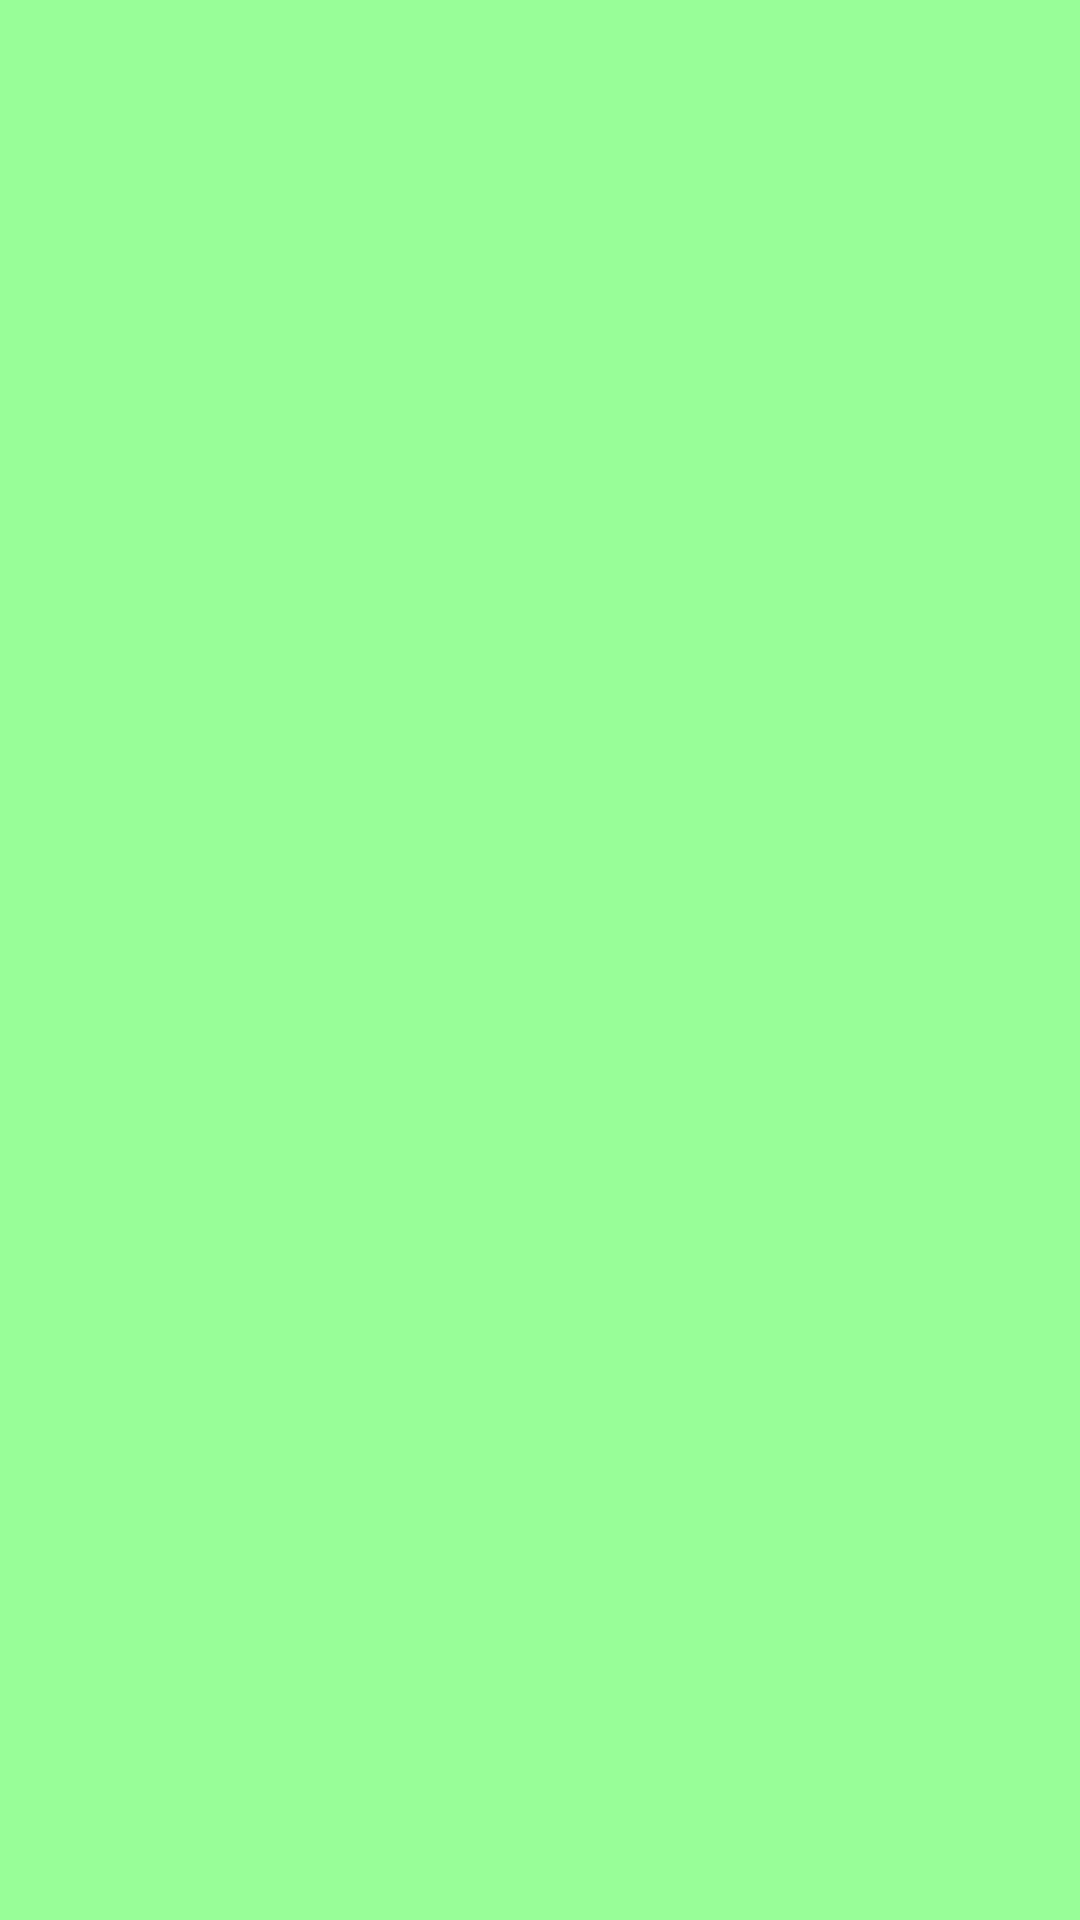 iPhone X Wallpaper Light Green with resolution 1080X1920 pixel. You can make this wallpaper for your iPhone 5, 6, 7, 8, X backgrounds, Mobile Screensaver, or iPad Lock Screen